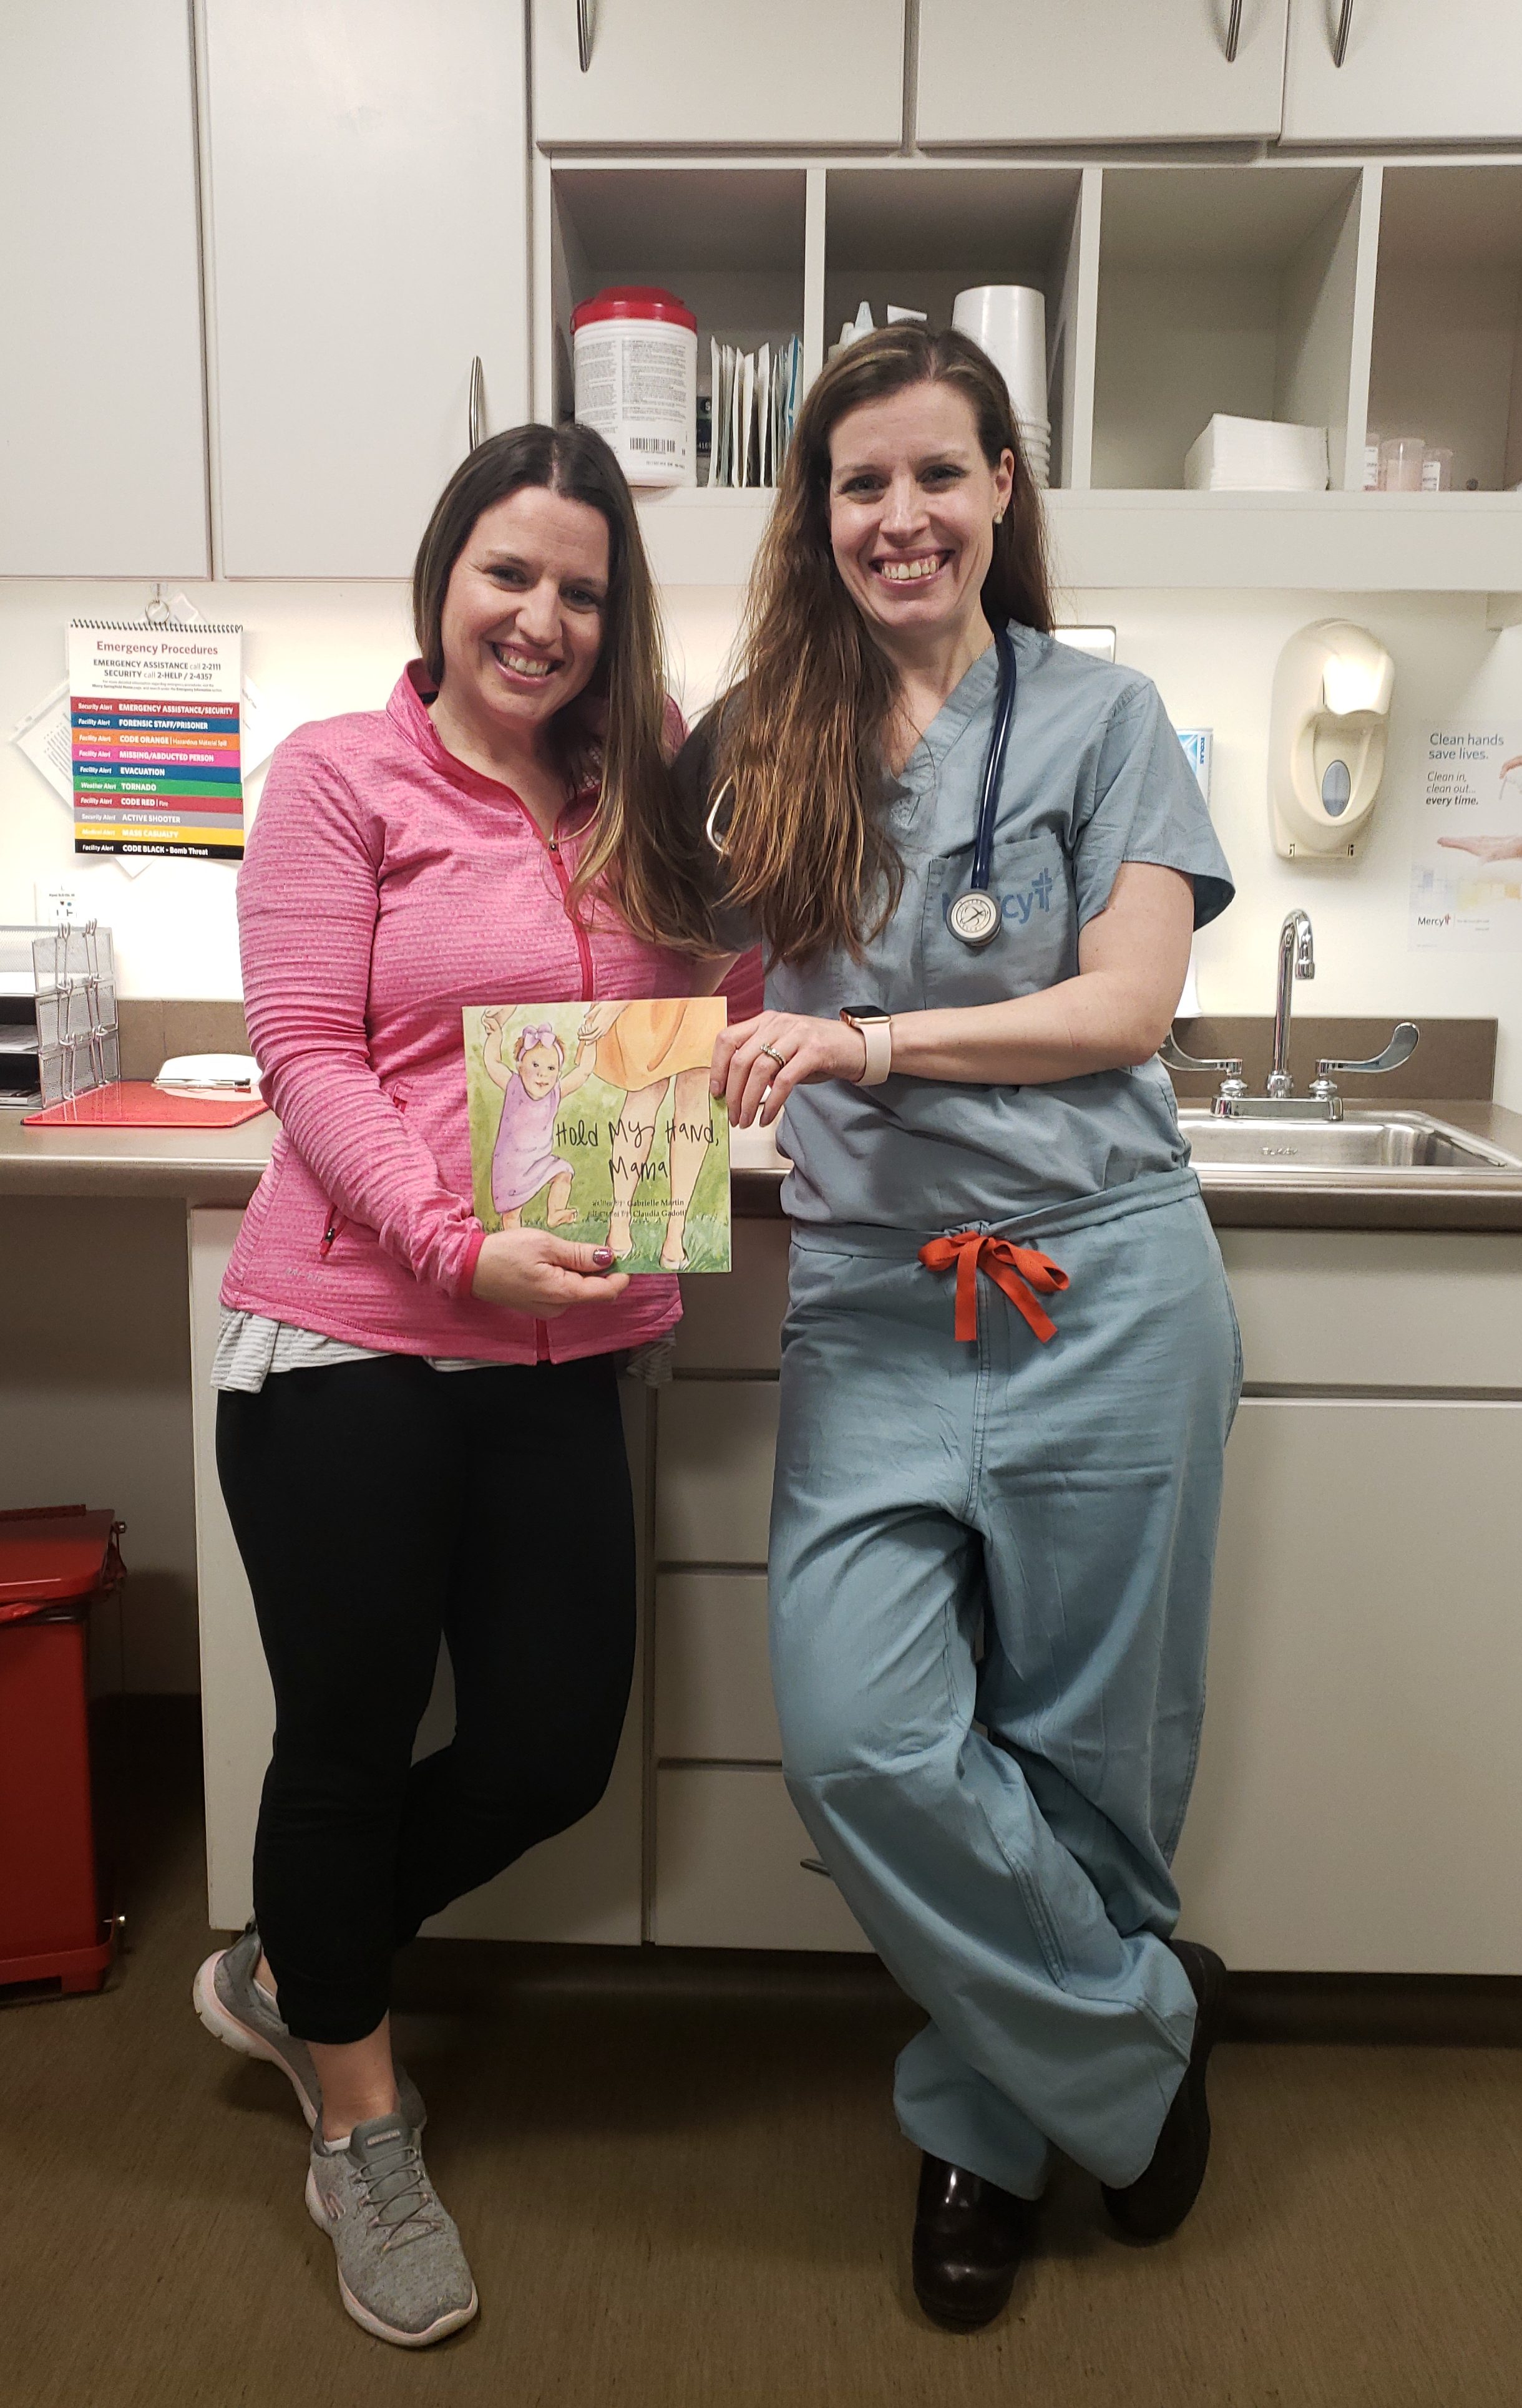 Gabrielle Martin, Author (left) with Dr. Holly-Marie Bolger, OB/GYN (right)